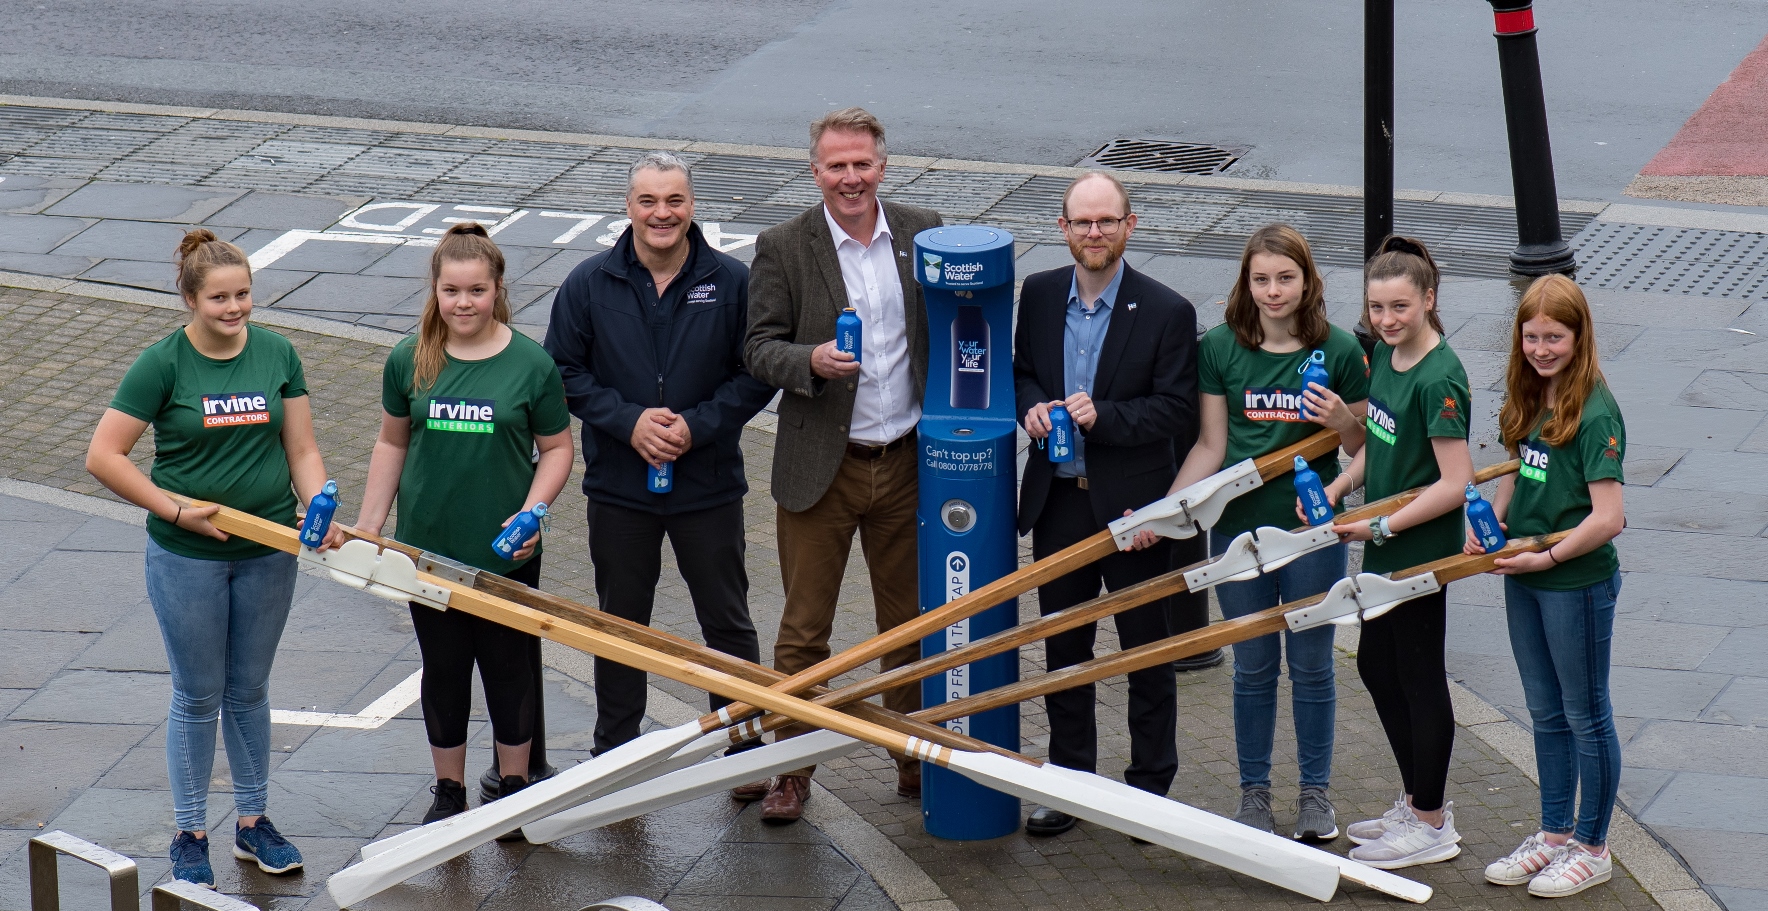 Scotland’s most northerly Top Up Tap launched in Shetland